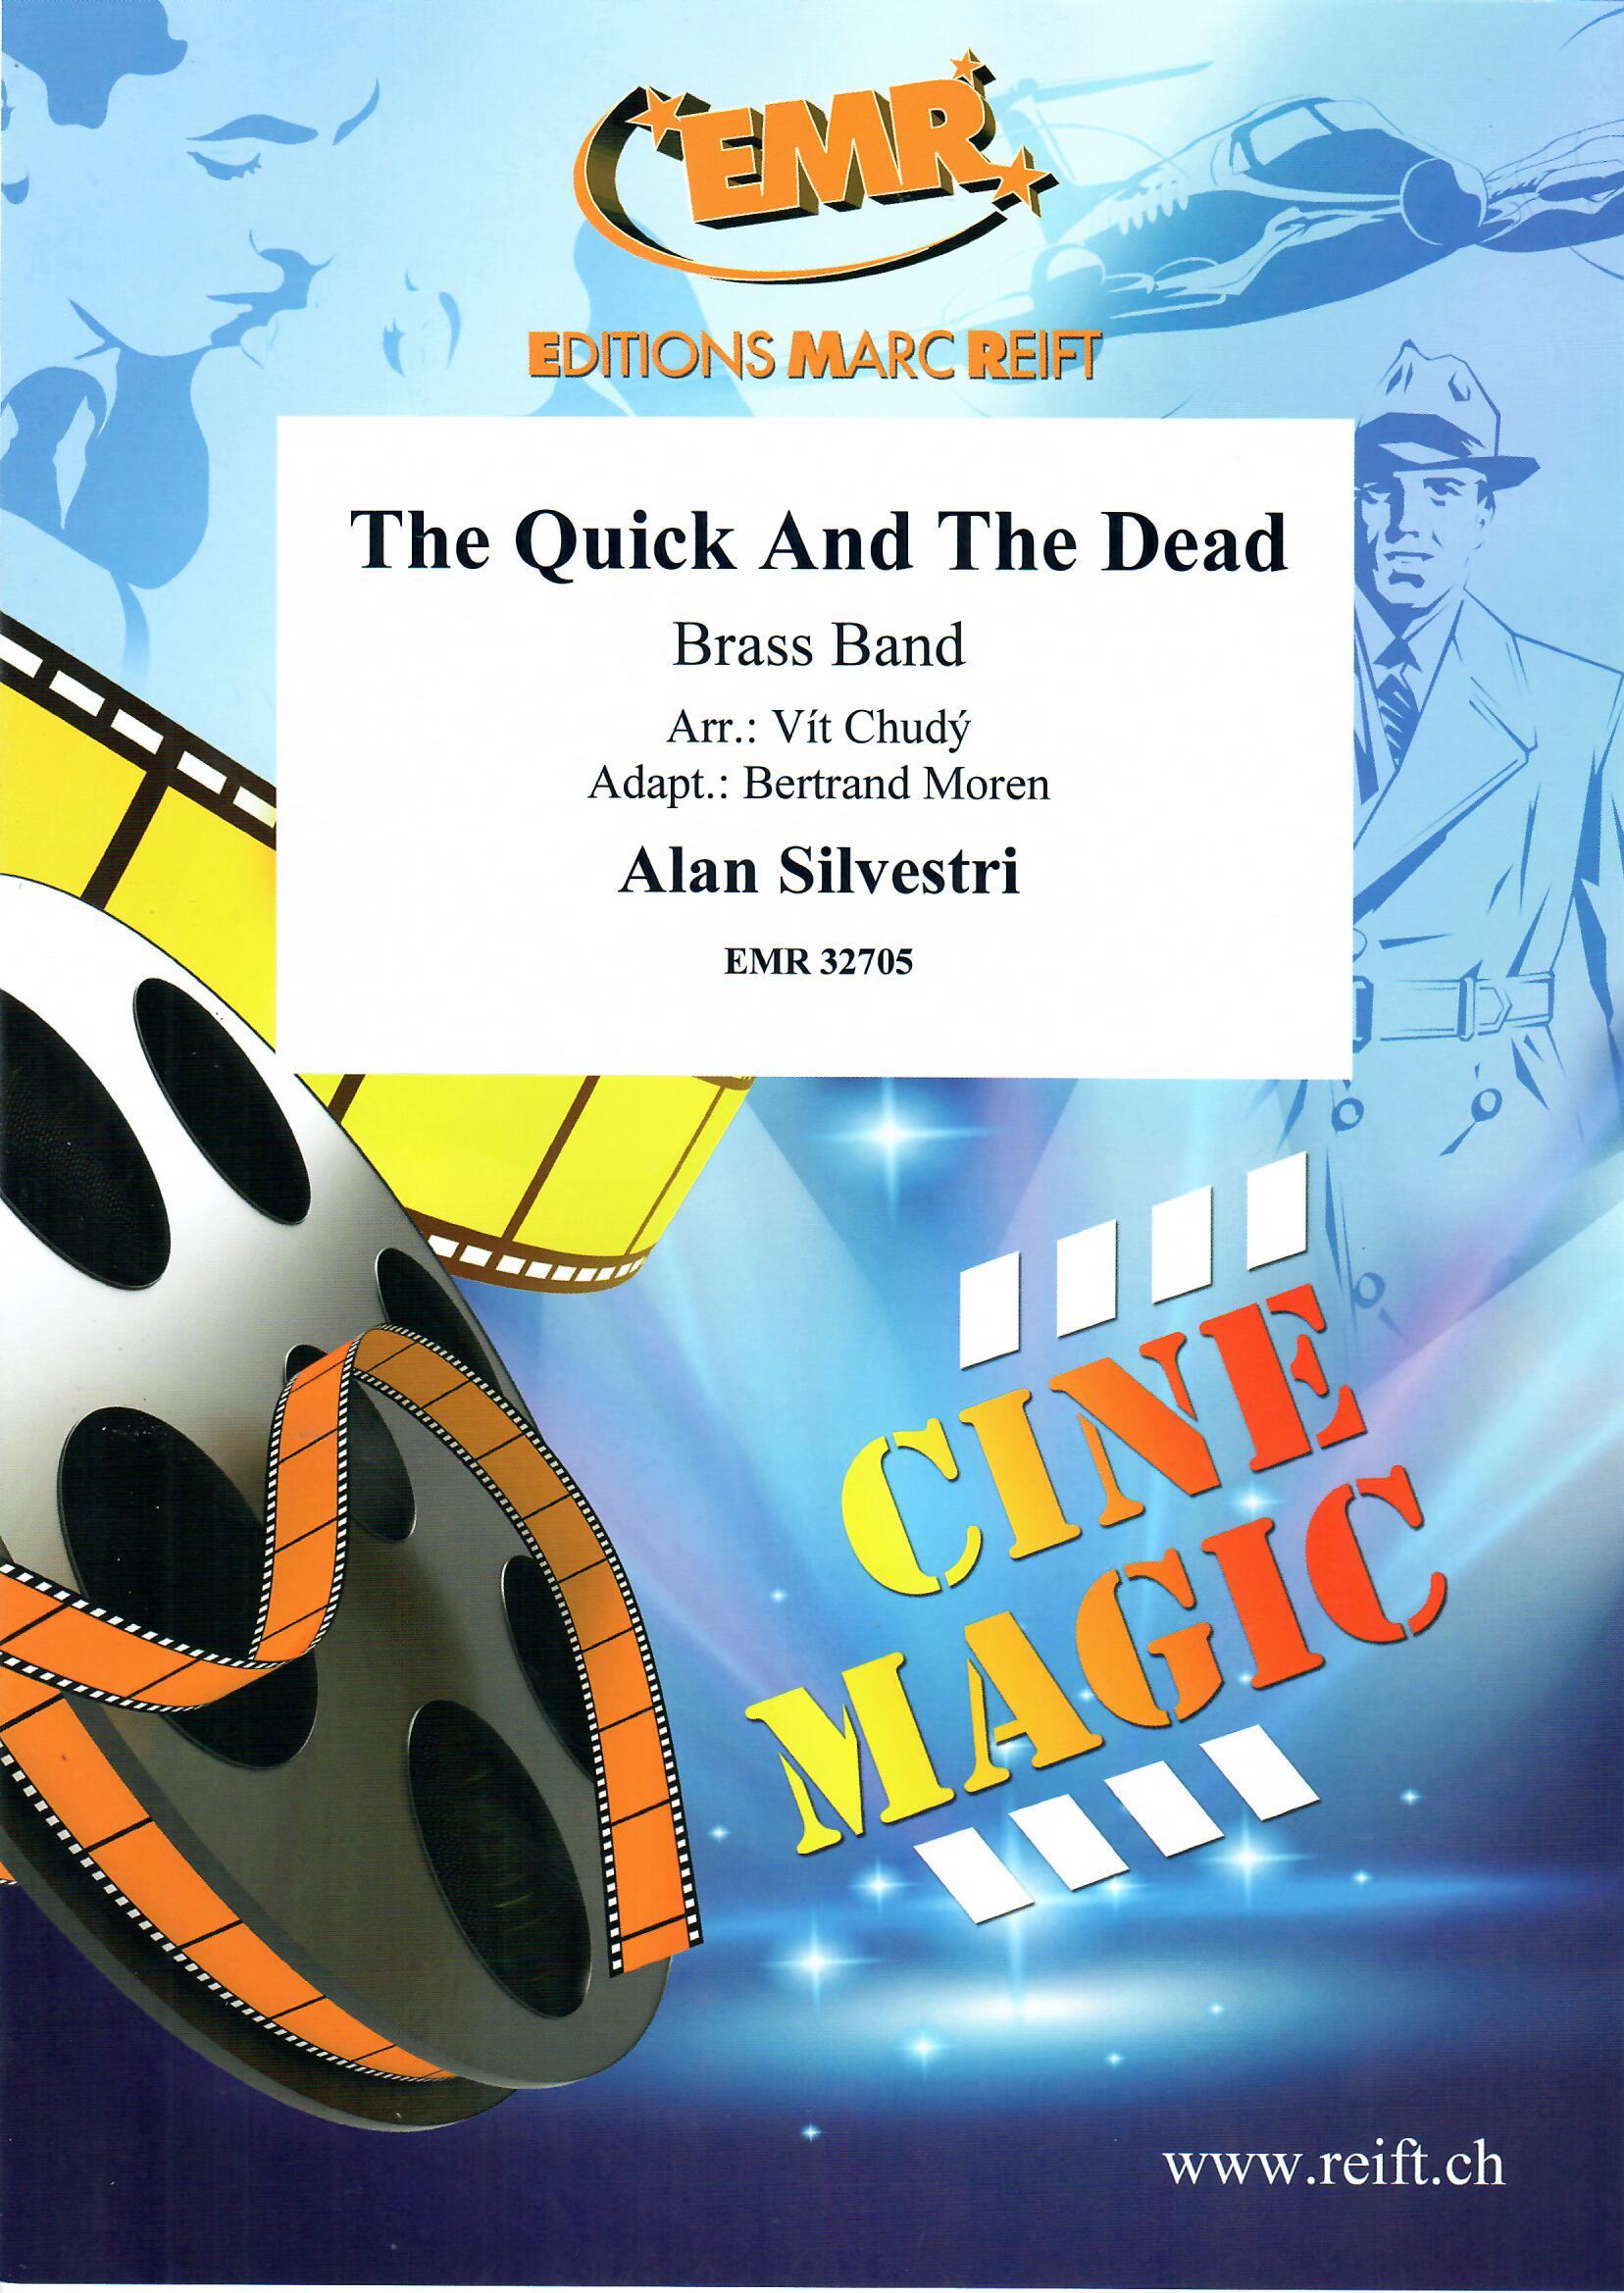 THE QUICK AND THE DEAD, NEW & RECENT Publications, FILM MUSIC & MUSICALS